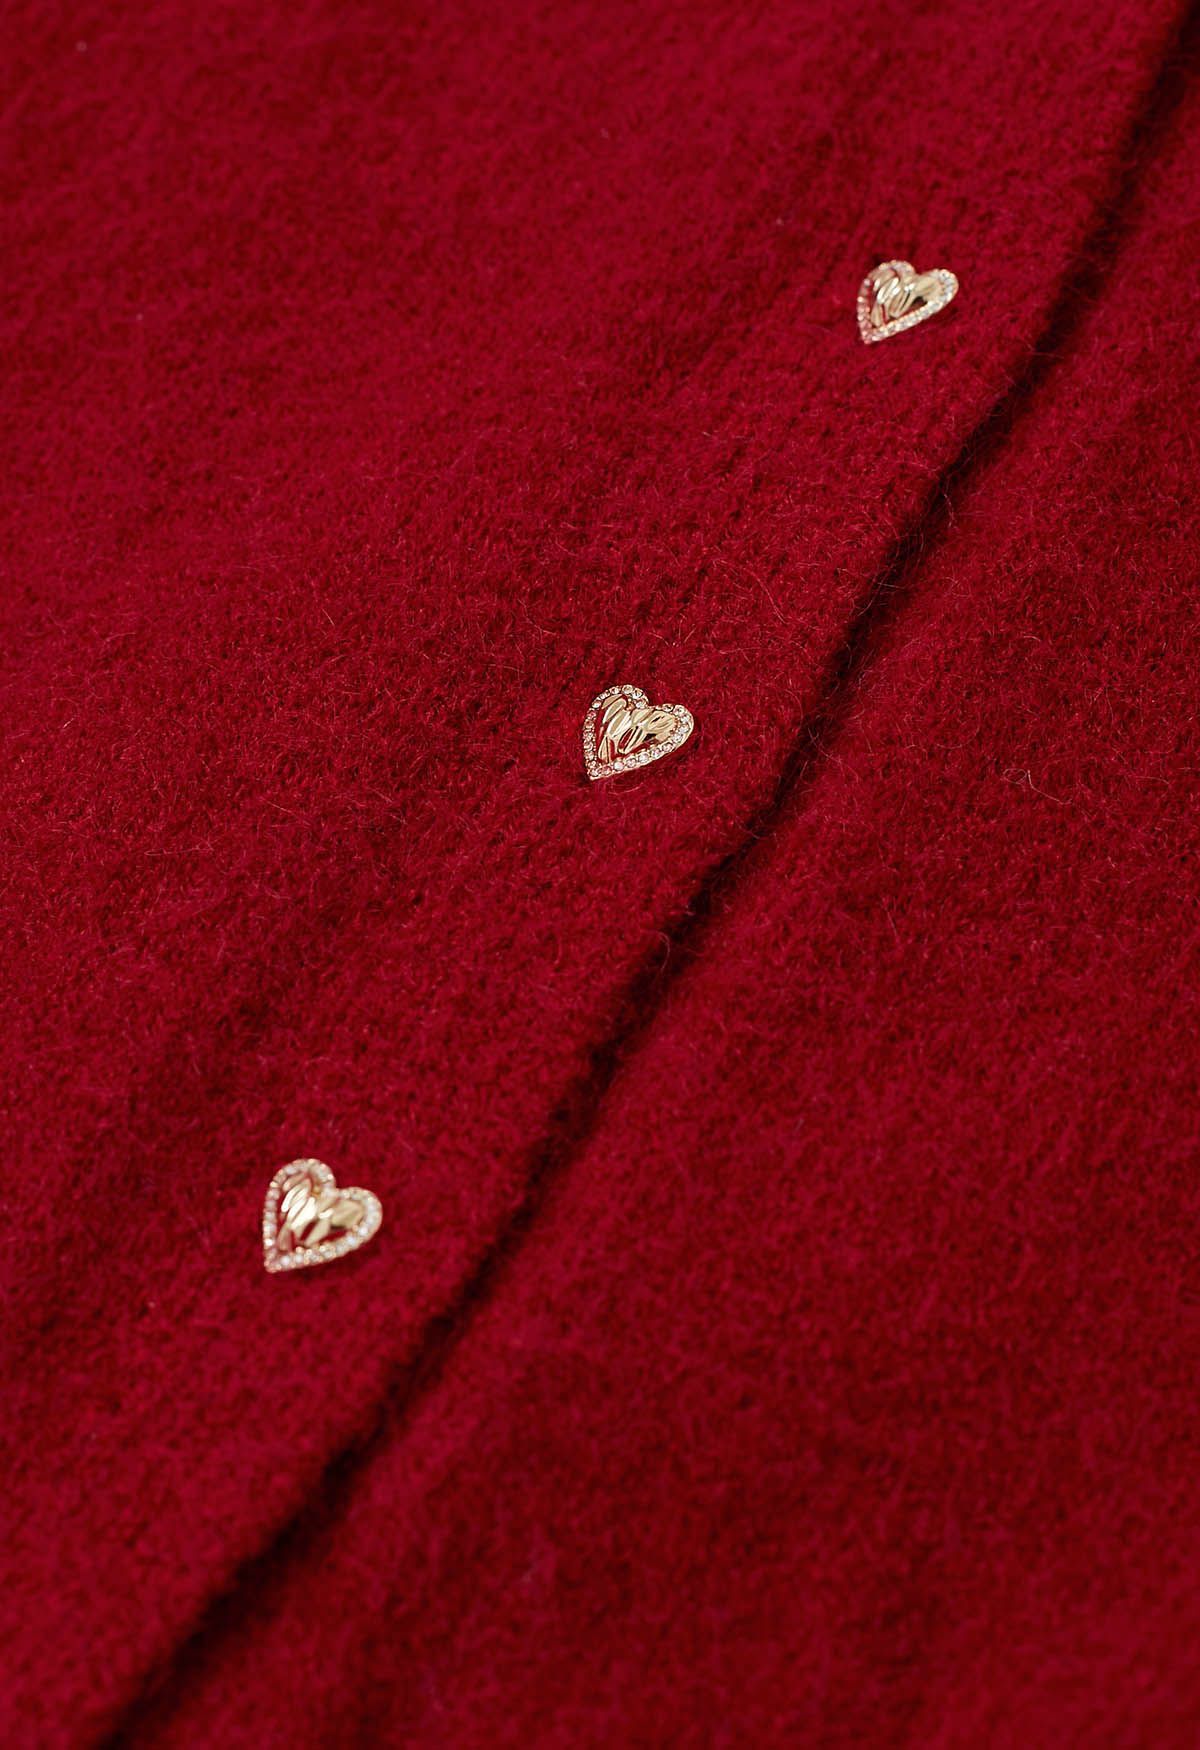 Embroidered Eyelet Bowknot Heart Button Fuzzy Knit Cardigan in Red